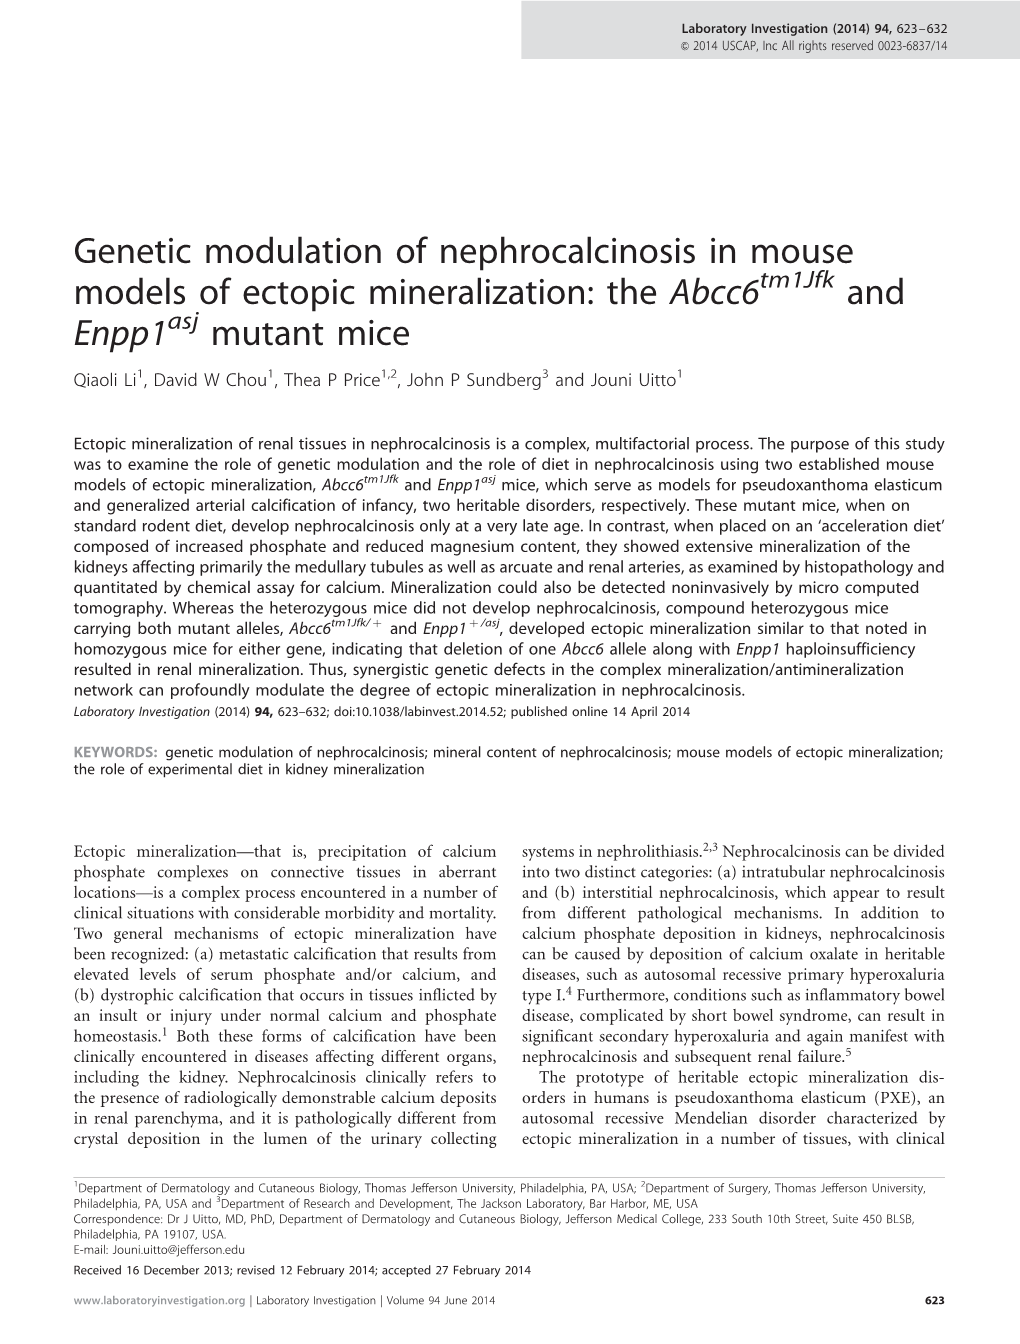 Genetic Modulation of Nephrocalcinosis in Mouse